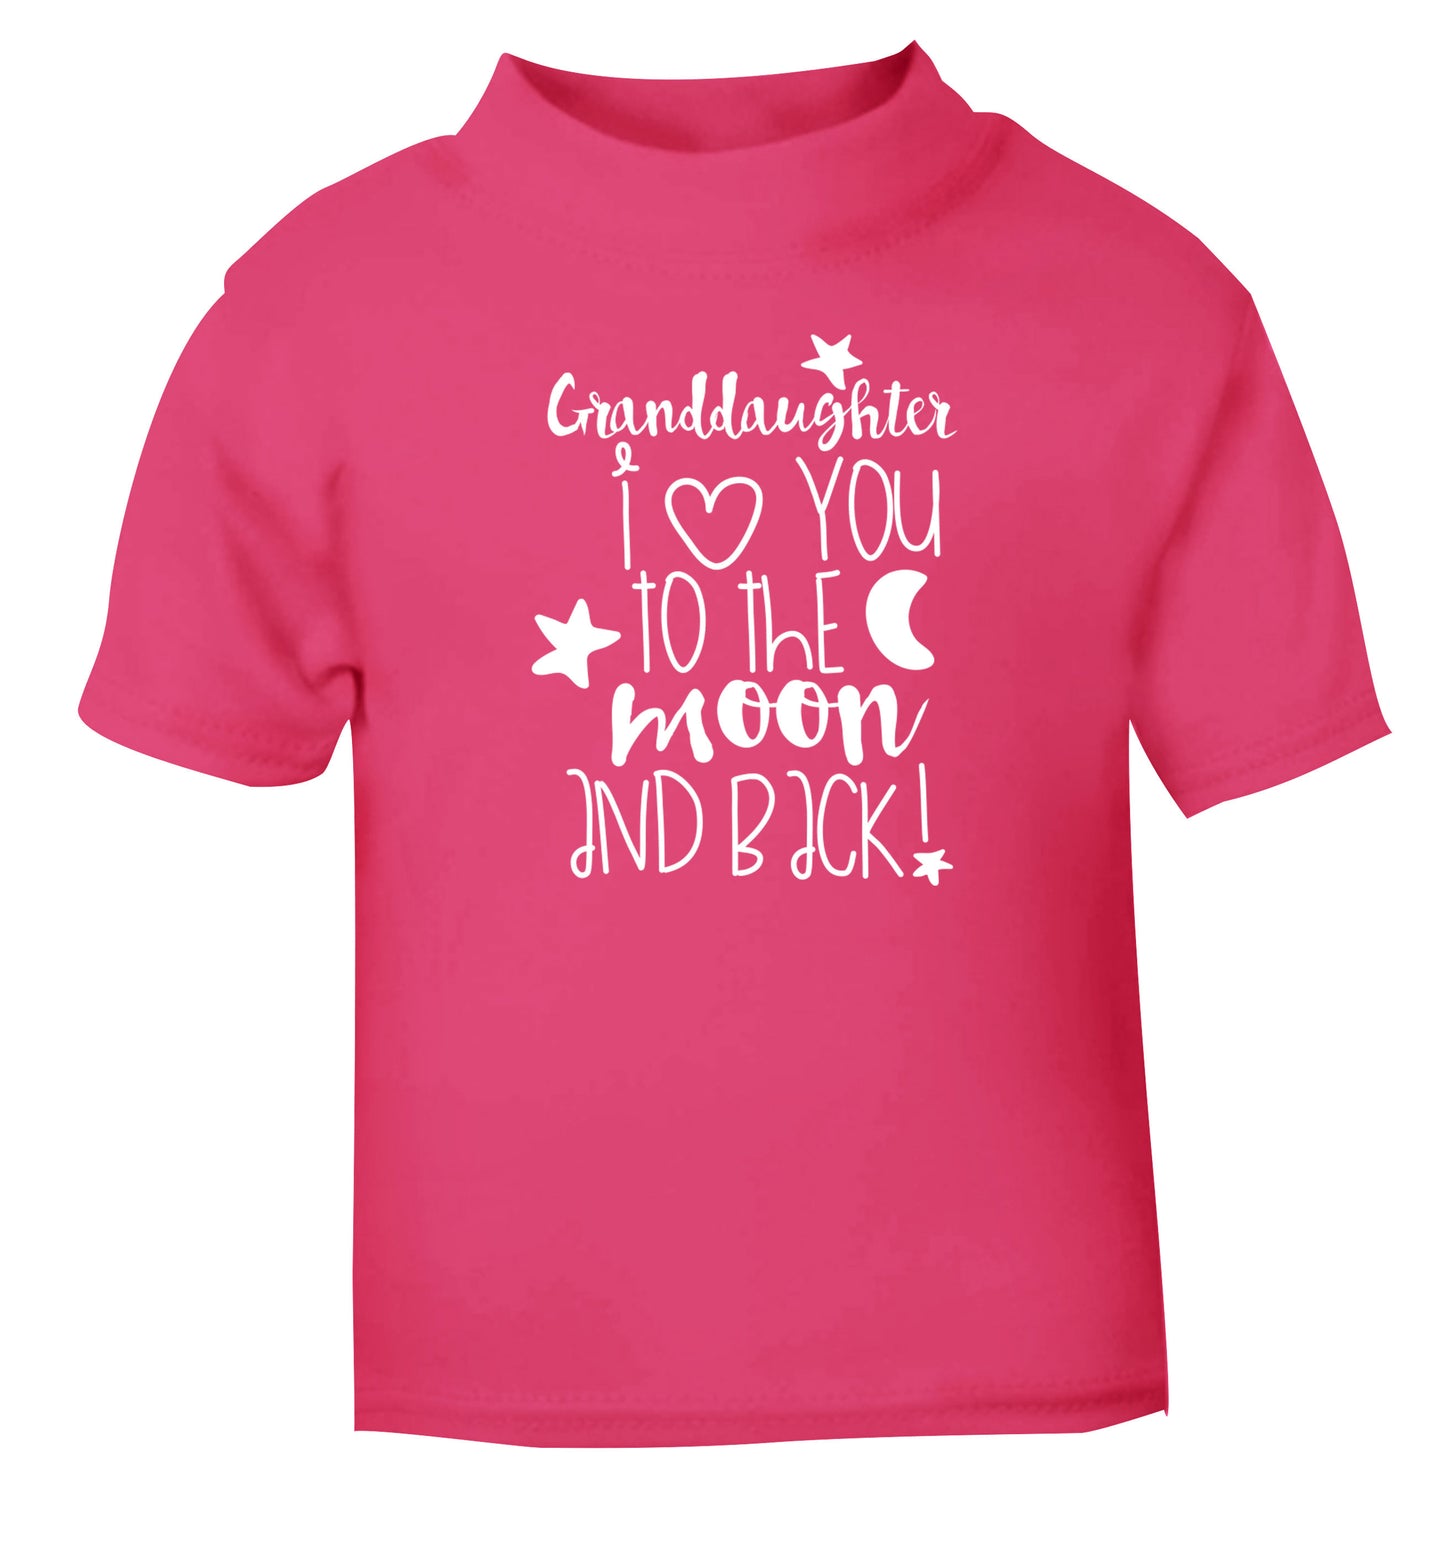 Granddaughter I love you to the moon and back pink Baby Toddler Tshirt 2 Years